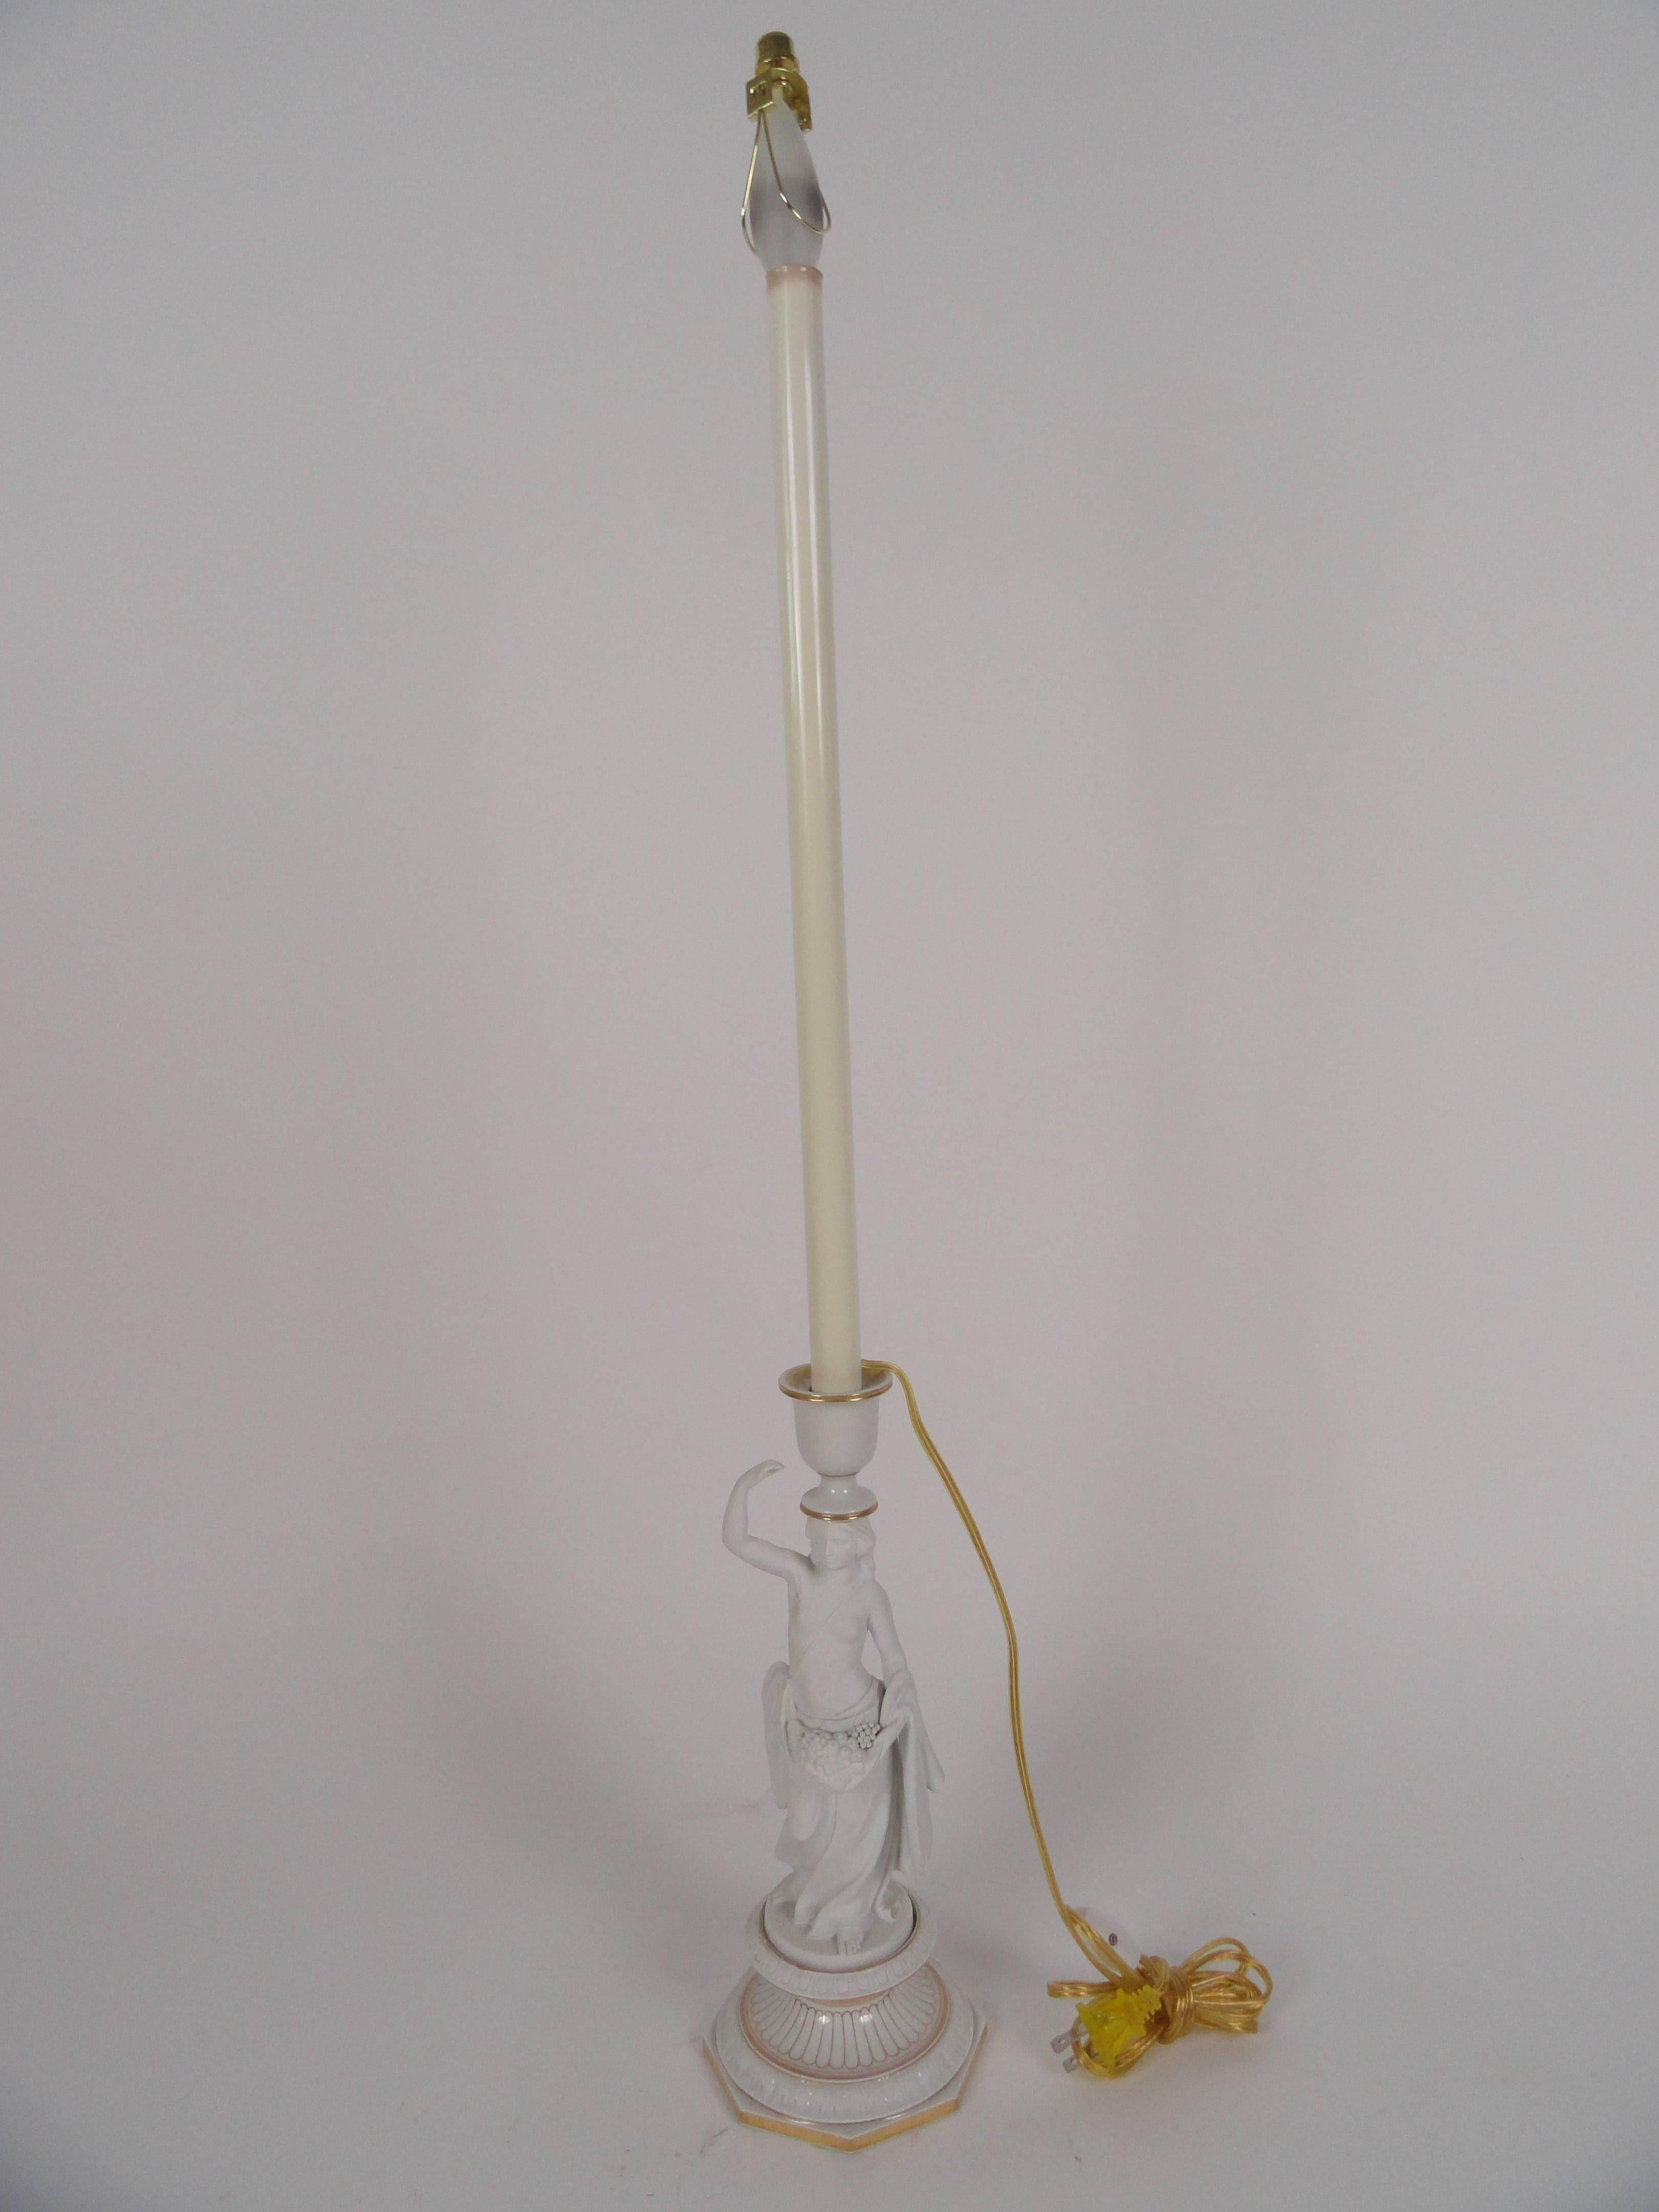 White bisque female figure lamp. Gold leaf detail. Markings on bottom. Newly wired with inline switch. Measures: Height to top of figure is 13